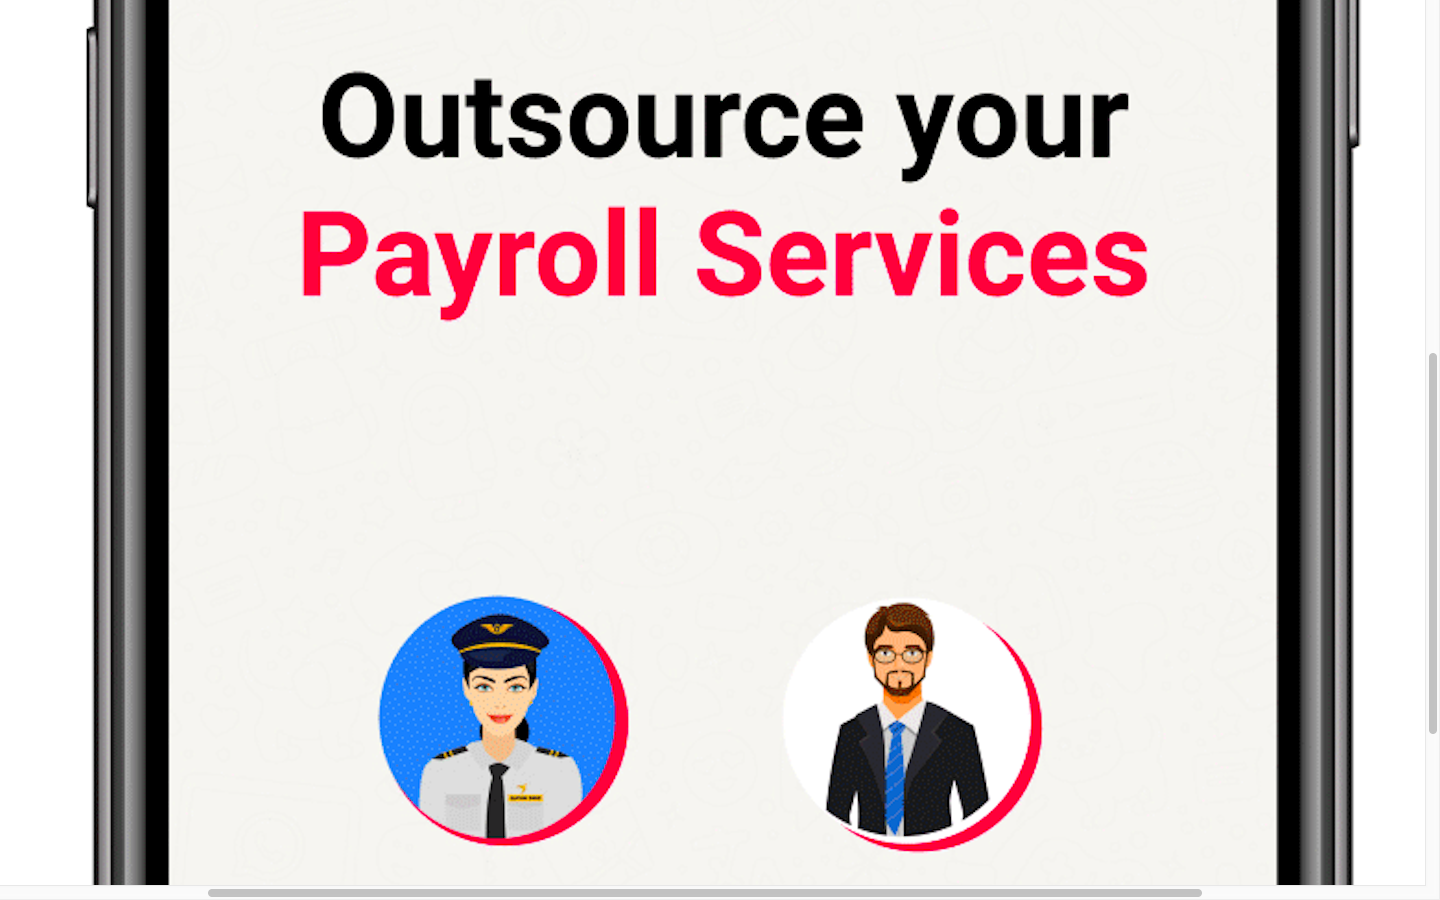 Outsource your Payroll Services